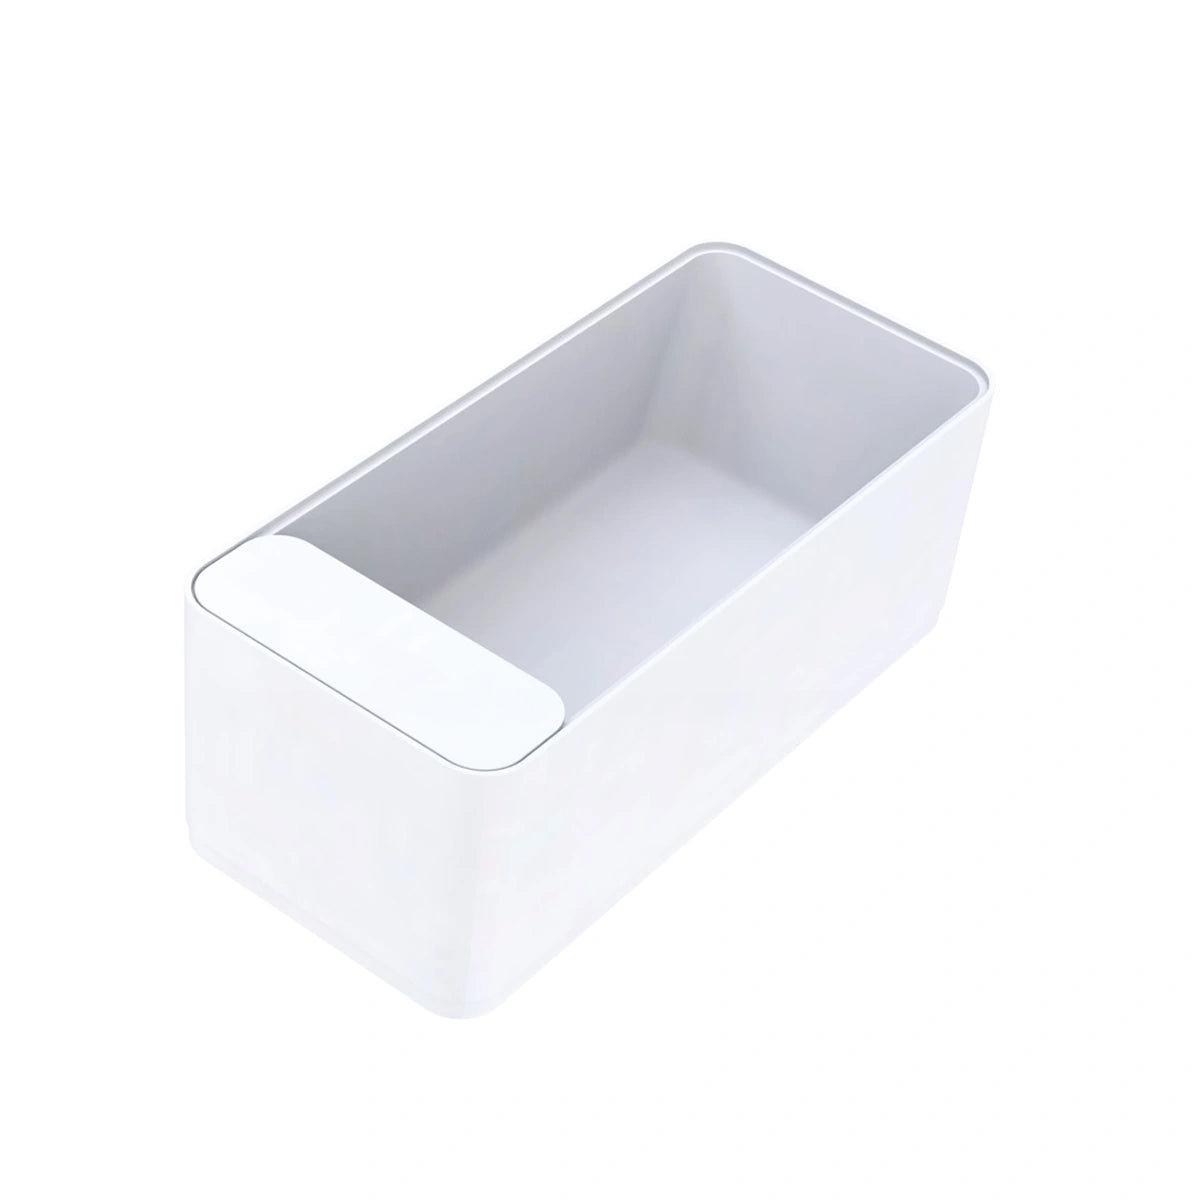 Independiente Tub Glow - 62.99 in. x 28.74 in. - blanco mate